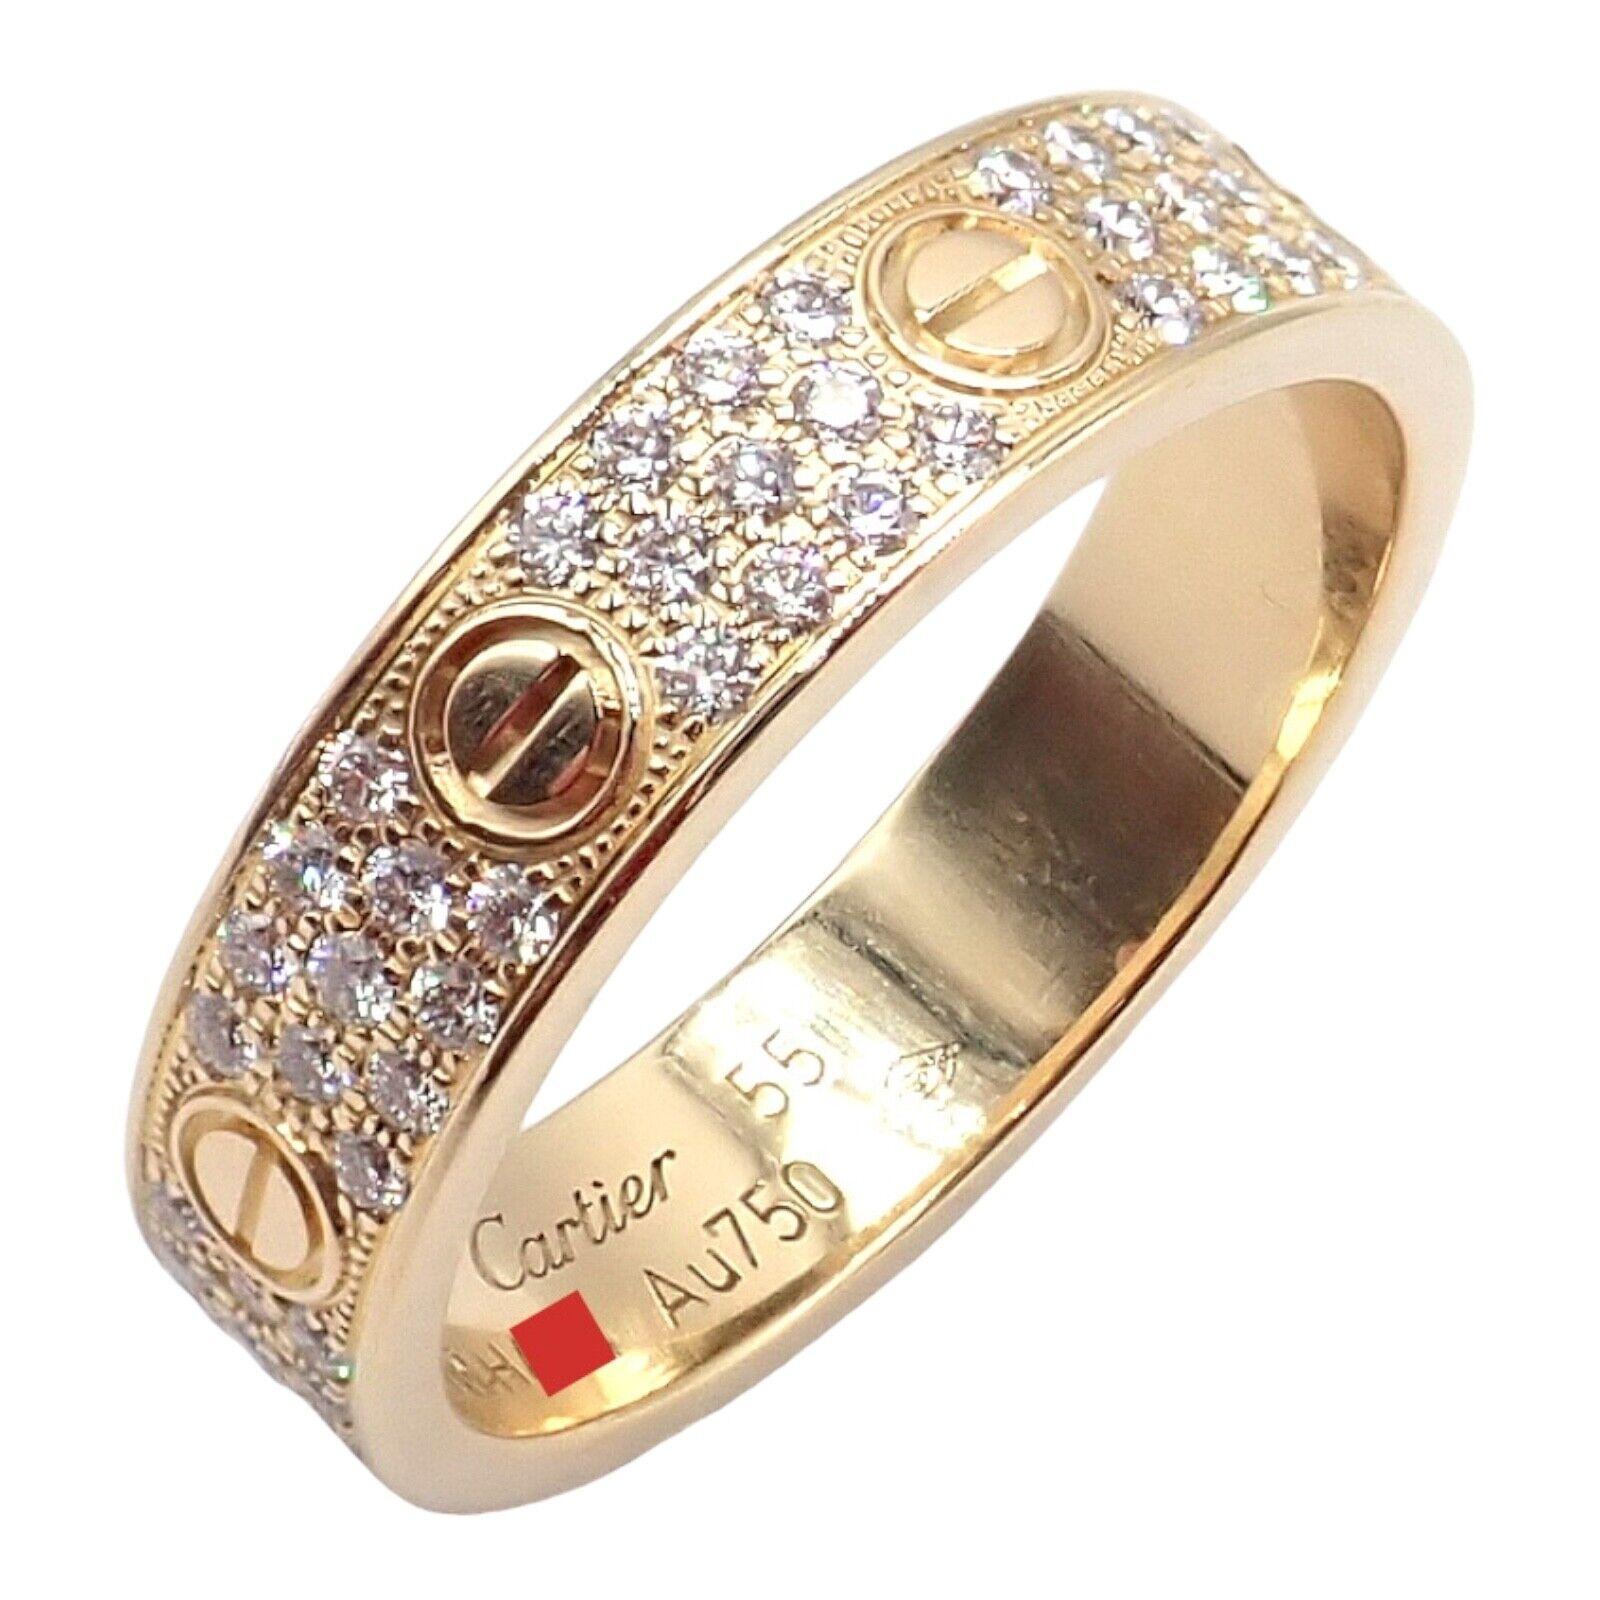 Cartier Love Diamond Paved Yellow Gold Band Ring 3